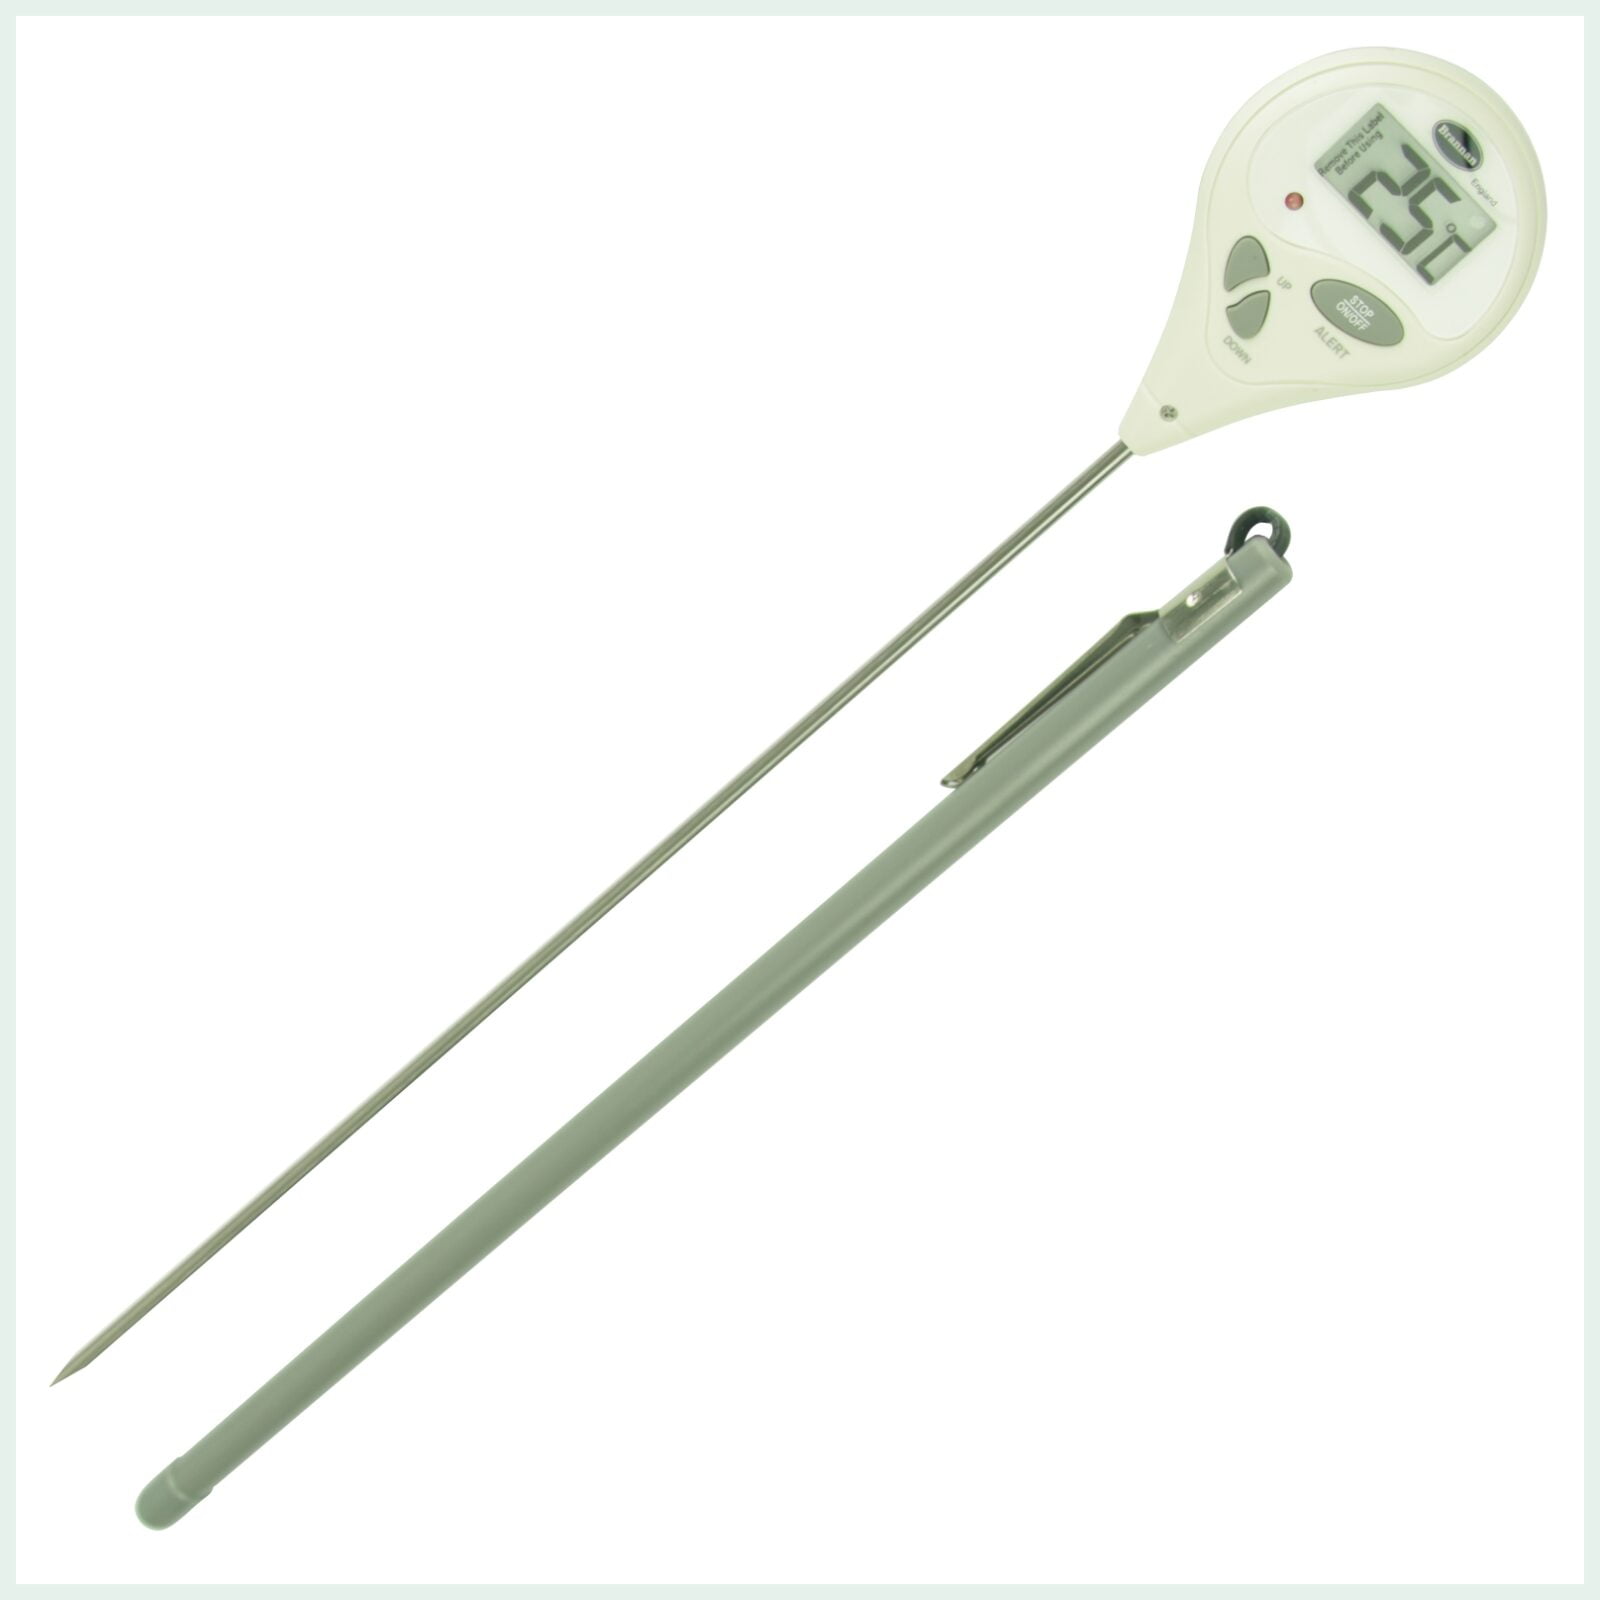 20cm digital probe thermometer with temperature alarm. For jam making, canning and pasteurising.